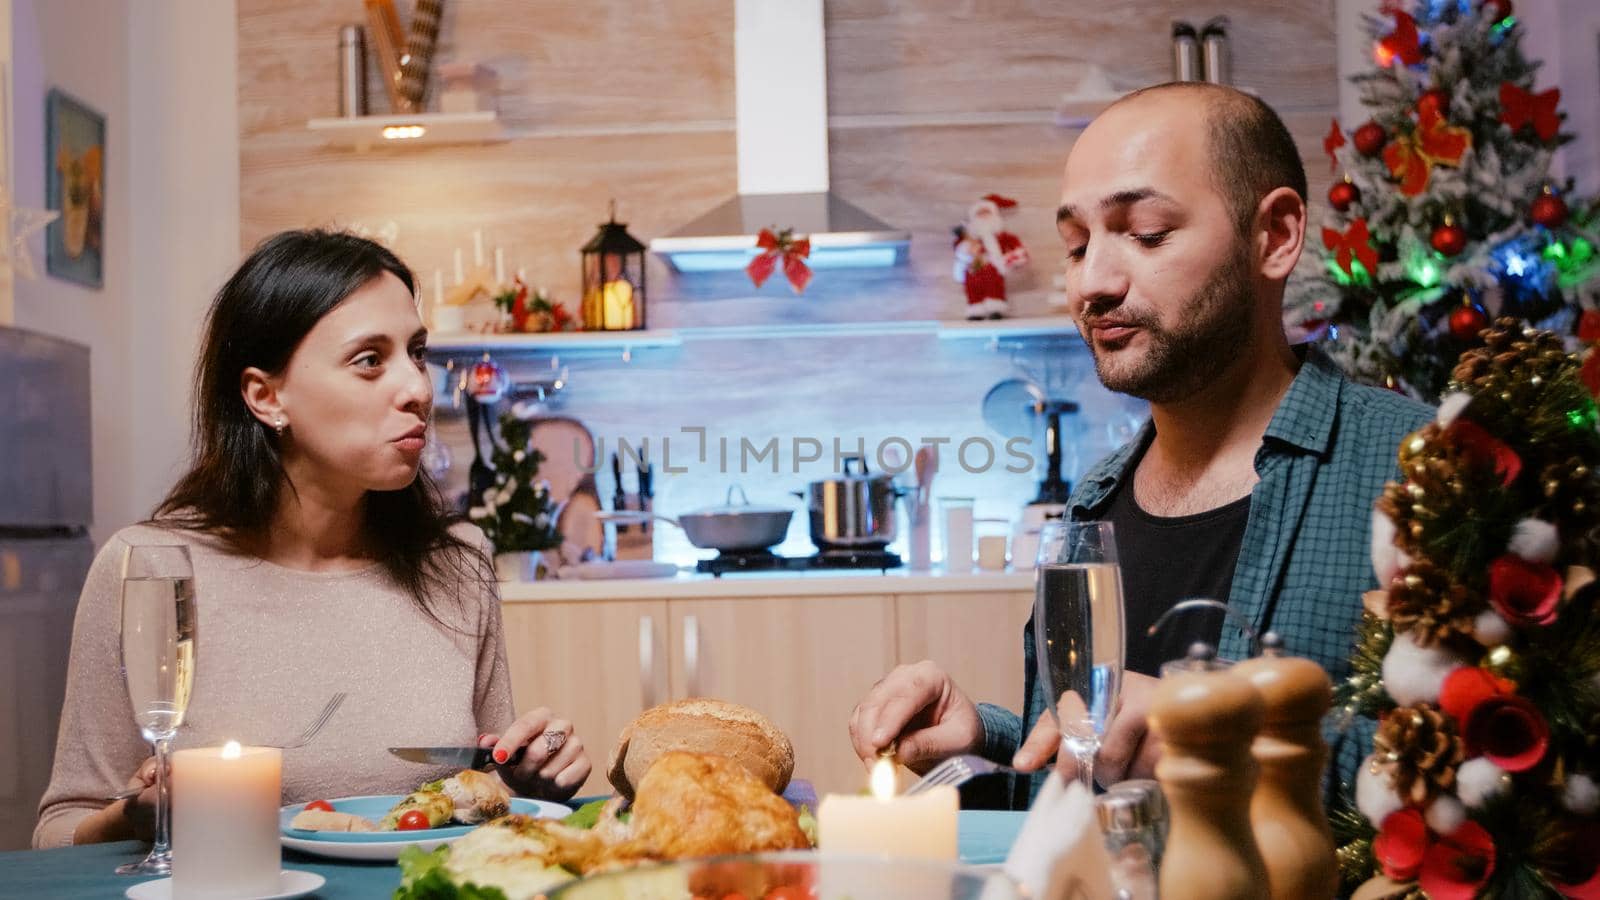 Man and woman celebrating christmas with festive dinner, enjoying traitional meal and drinking alcohol. Couple eating chicken and having glasses of champagne while chatting on holiday